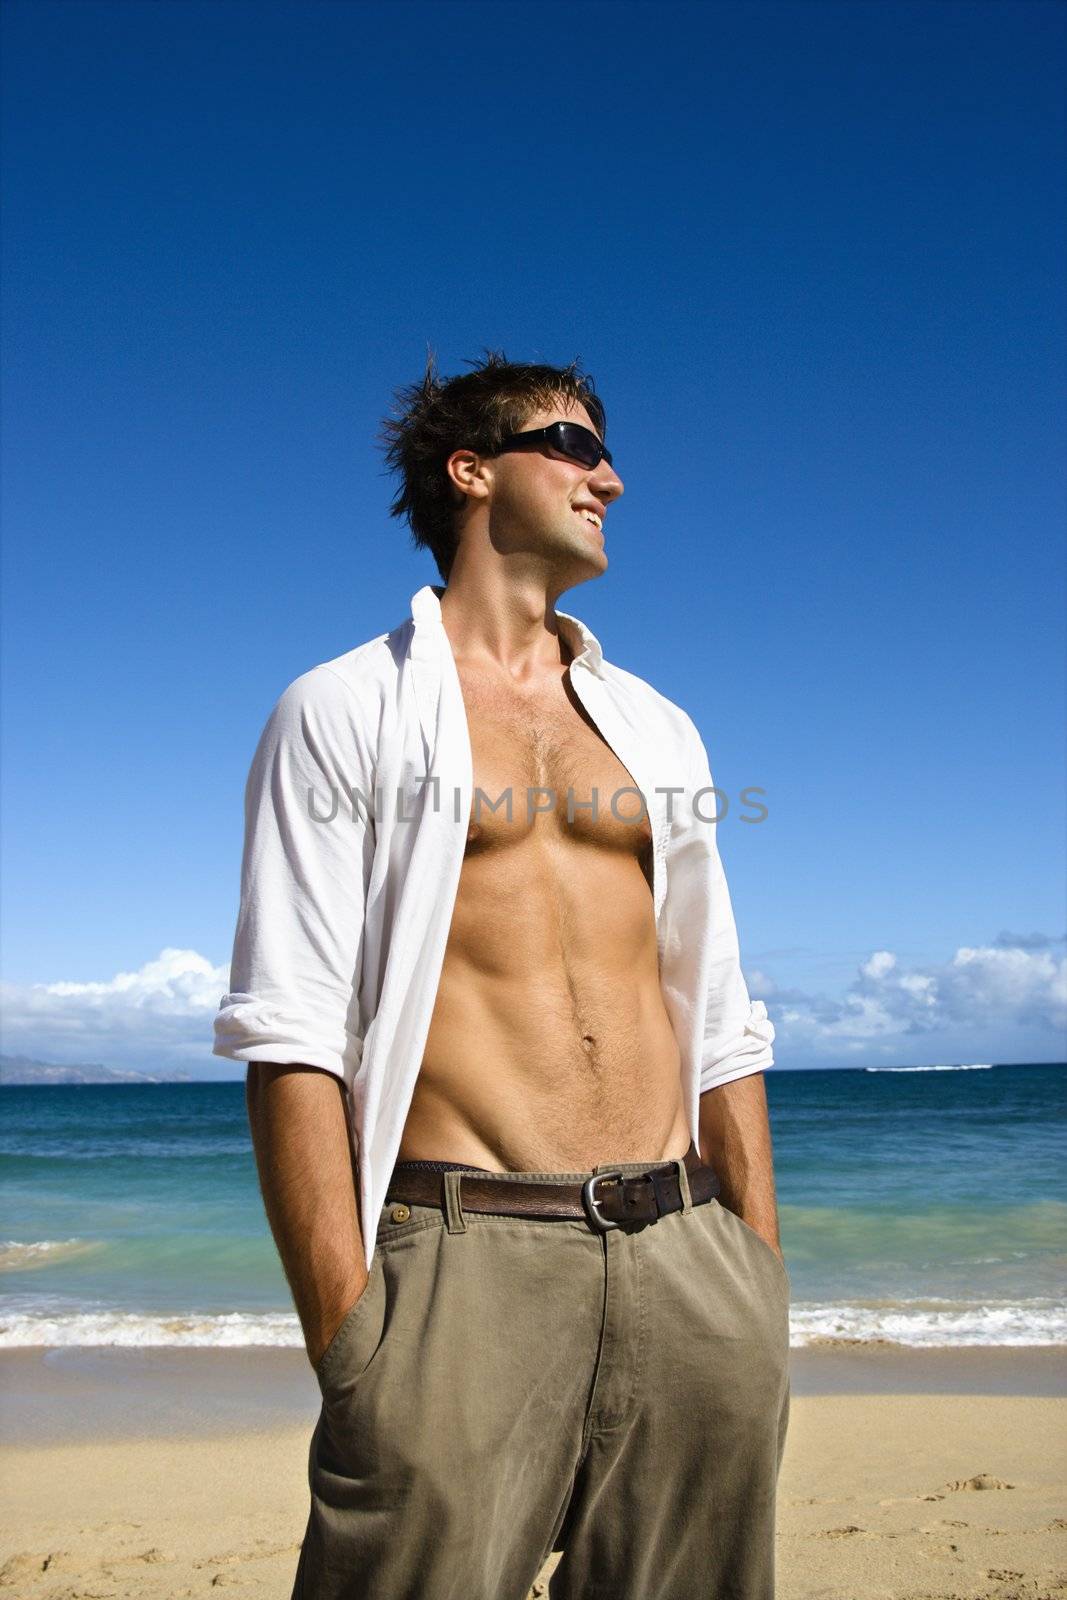 Portrait of attractive man standing with shirt unbuttoned wearing sunglasses on Maui, Hawaii beach.